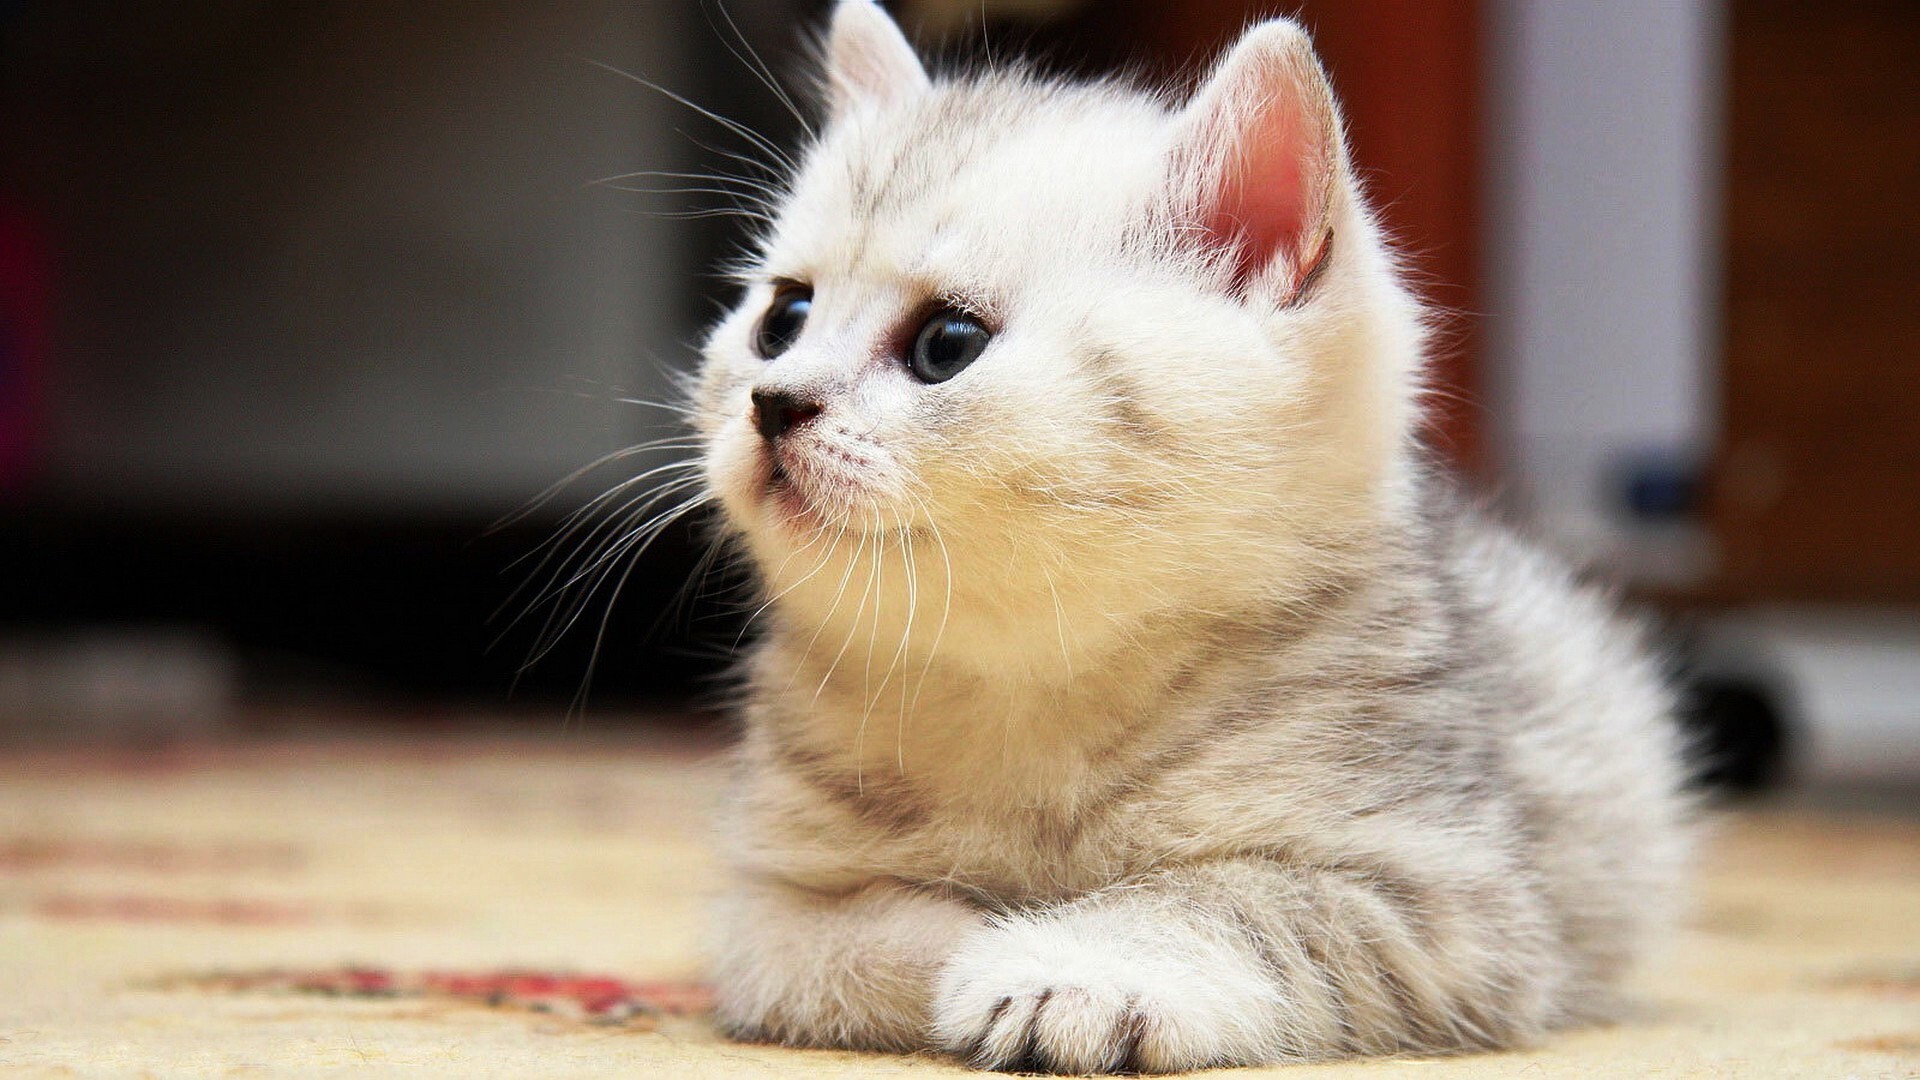 Kitten: British Shorthair, The pedigreed version of the traditional British domestic cat. 1920x1080 Full HD Background.